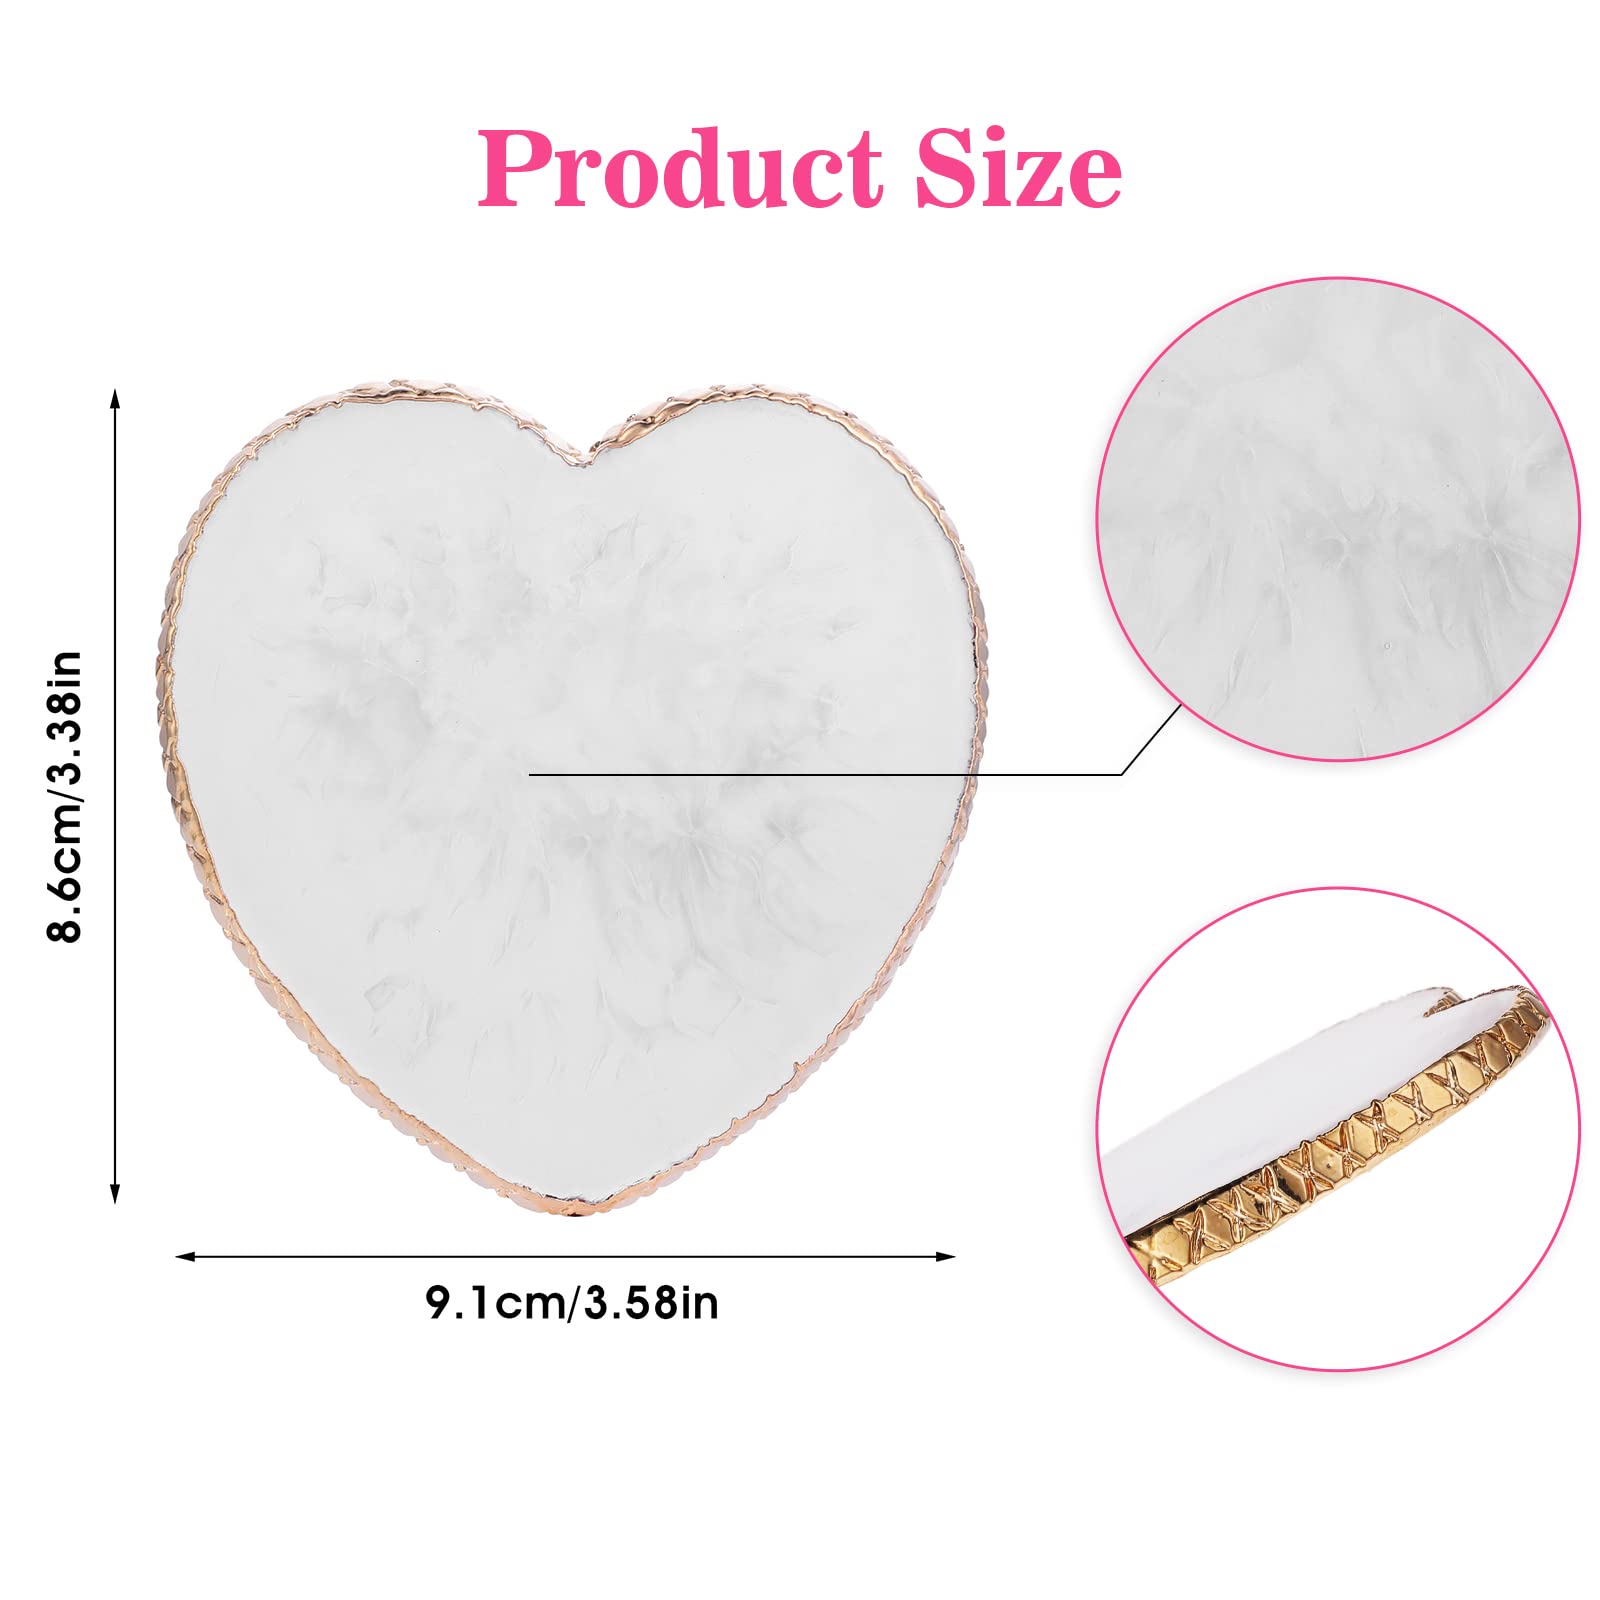 WLLHYF Resin Nail Art Palette, 2 Pieces Nail Mixing Palette Nail Art Painting Mixed Color Palettes Cosmetic Mixing Tools Golden Edge Nail Holder Display Board (Heart shaped-2pcs)